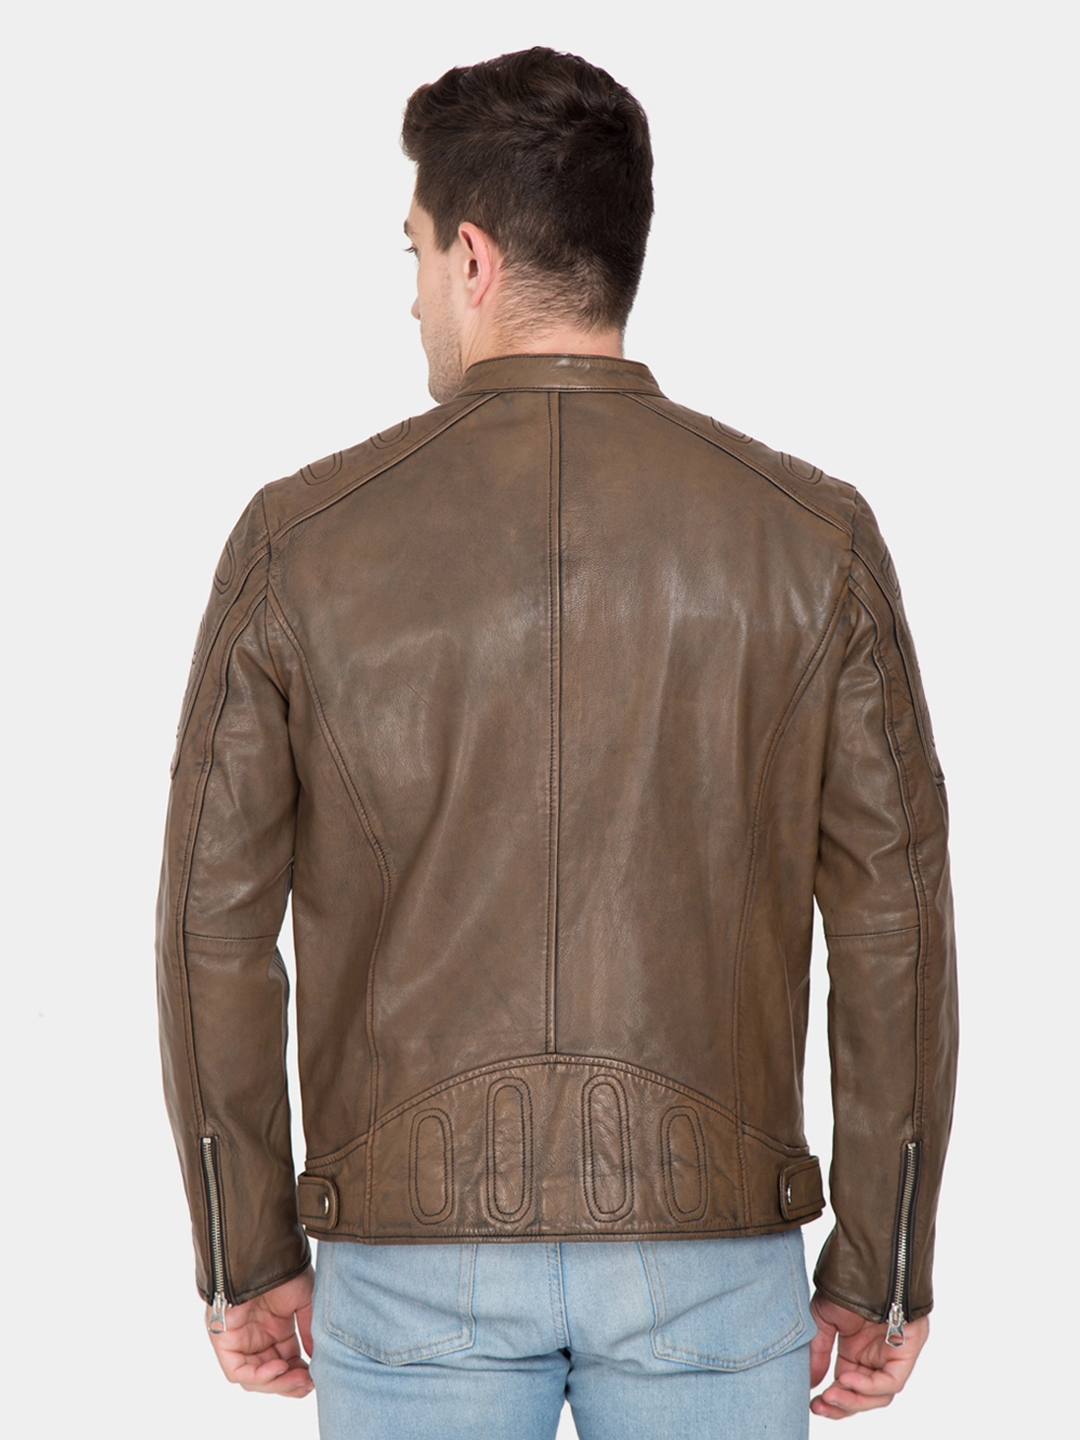 Justanned | JUSTANNED CAROB TAN LEATHER JACKET 3